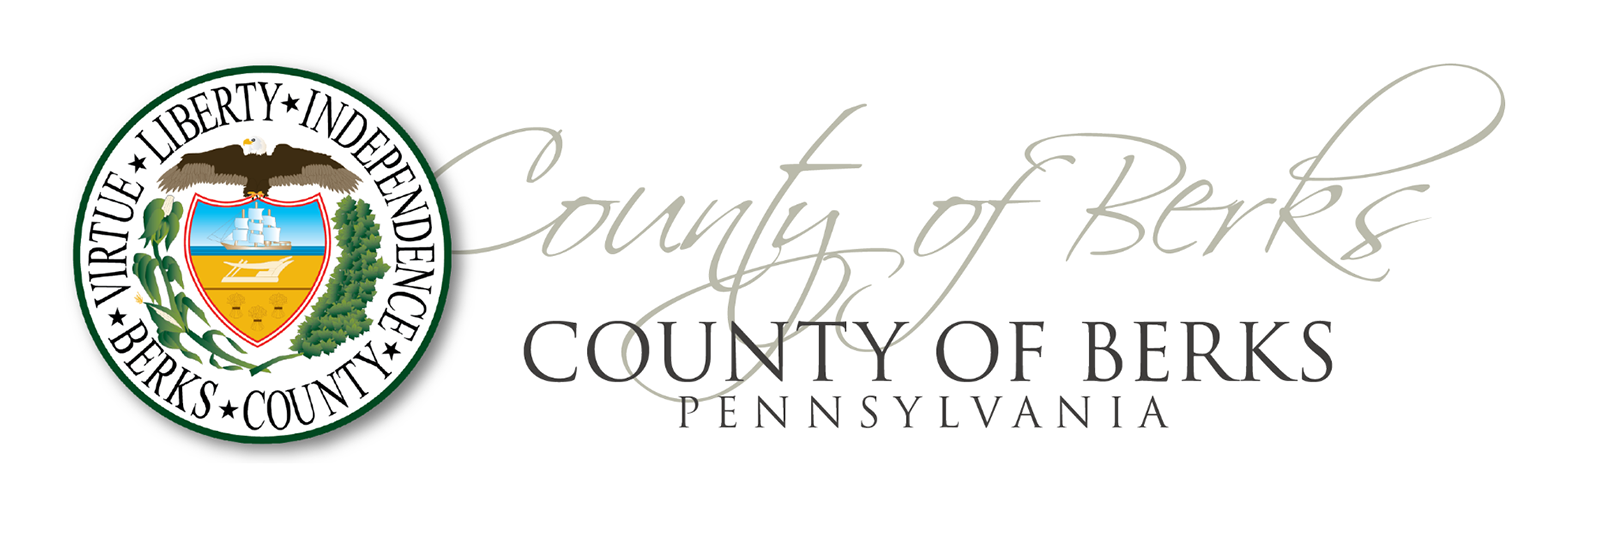 County of Berks Welcome Banner